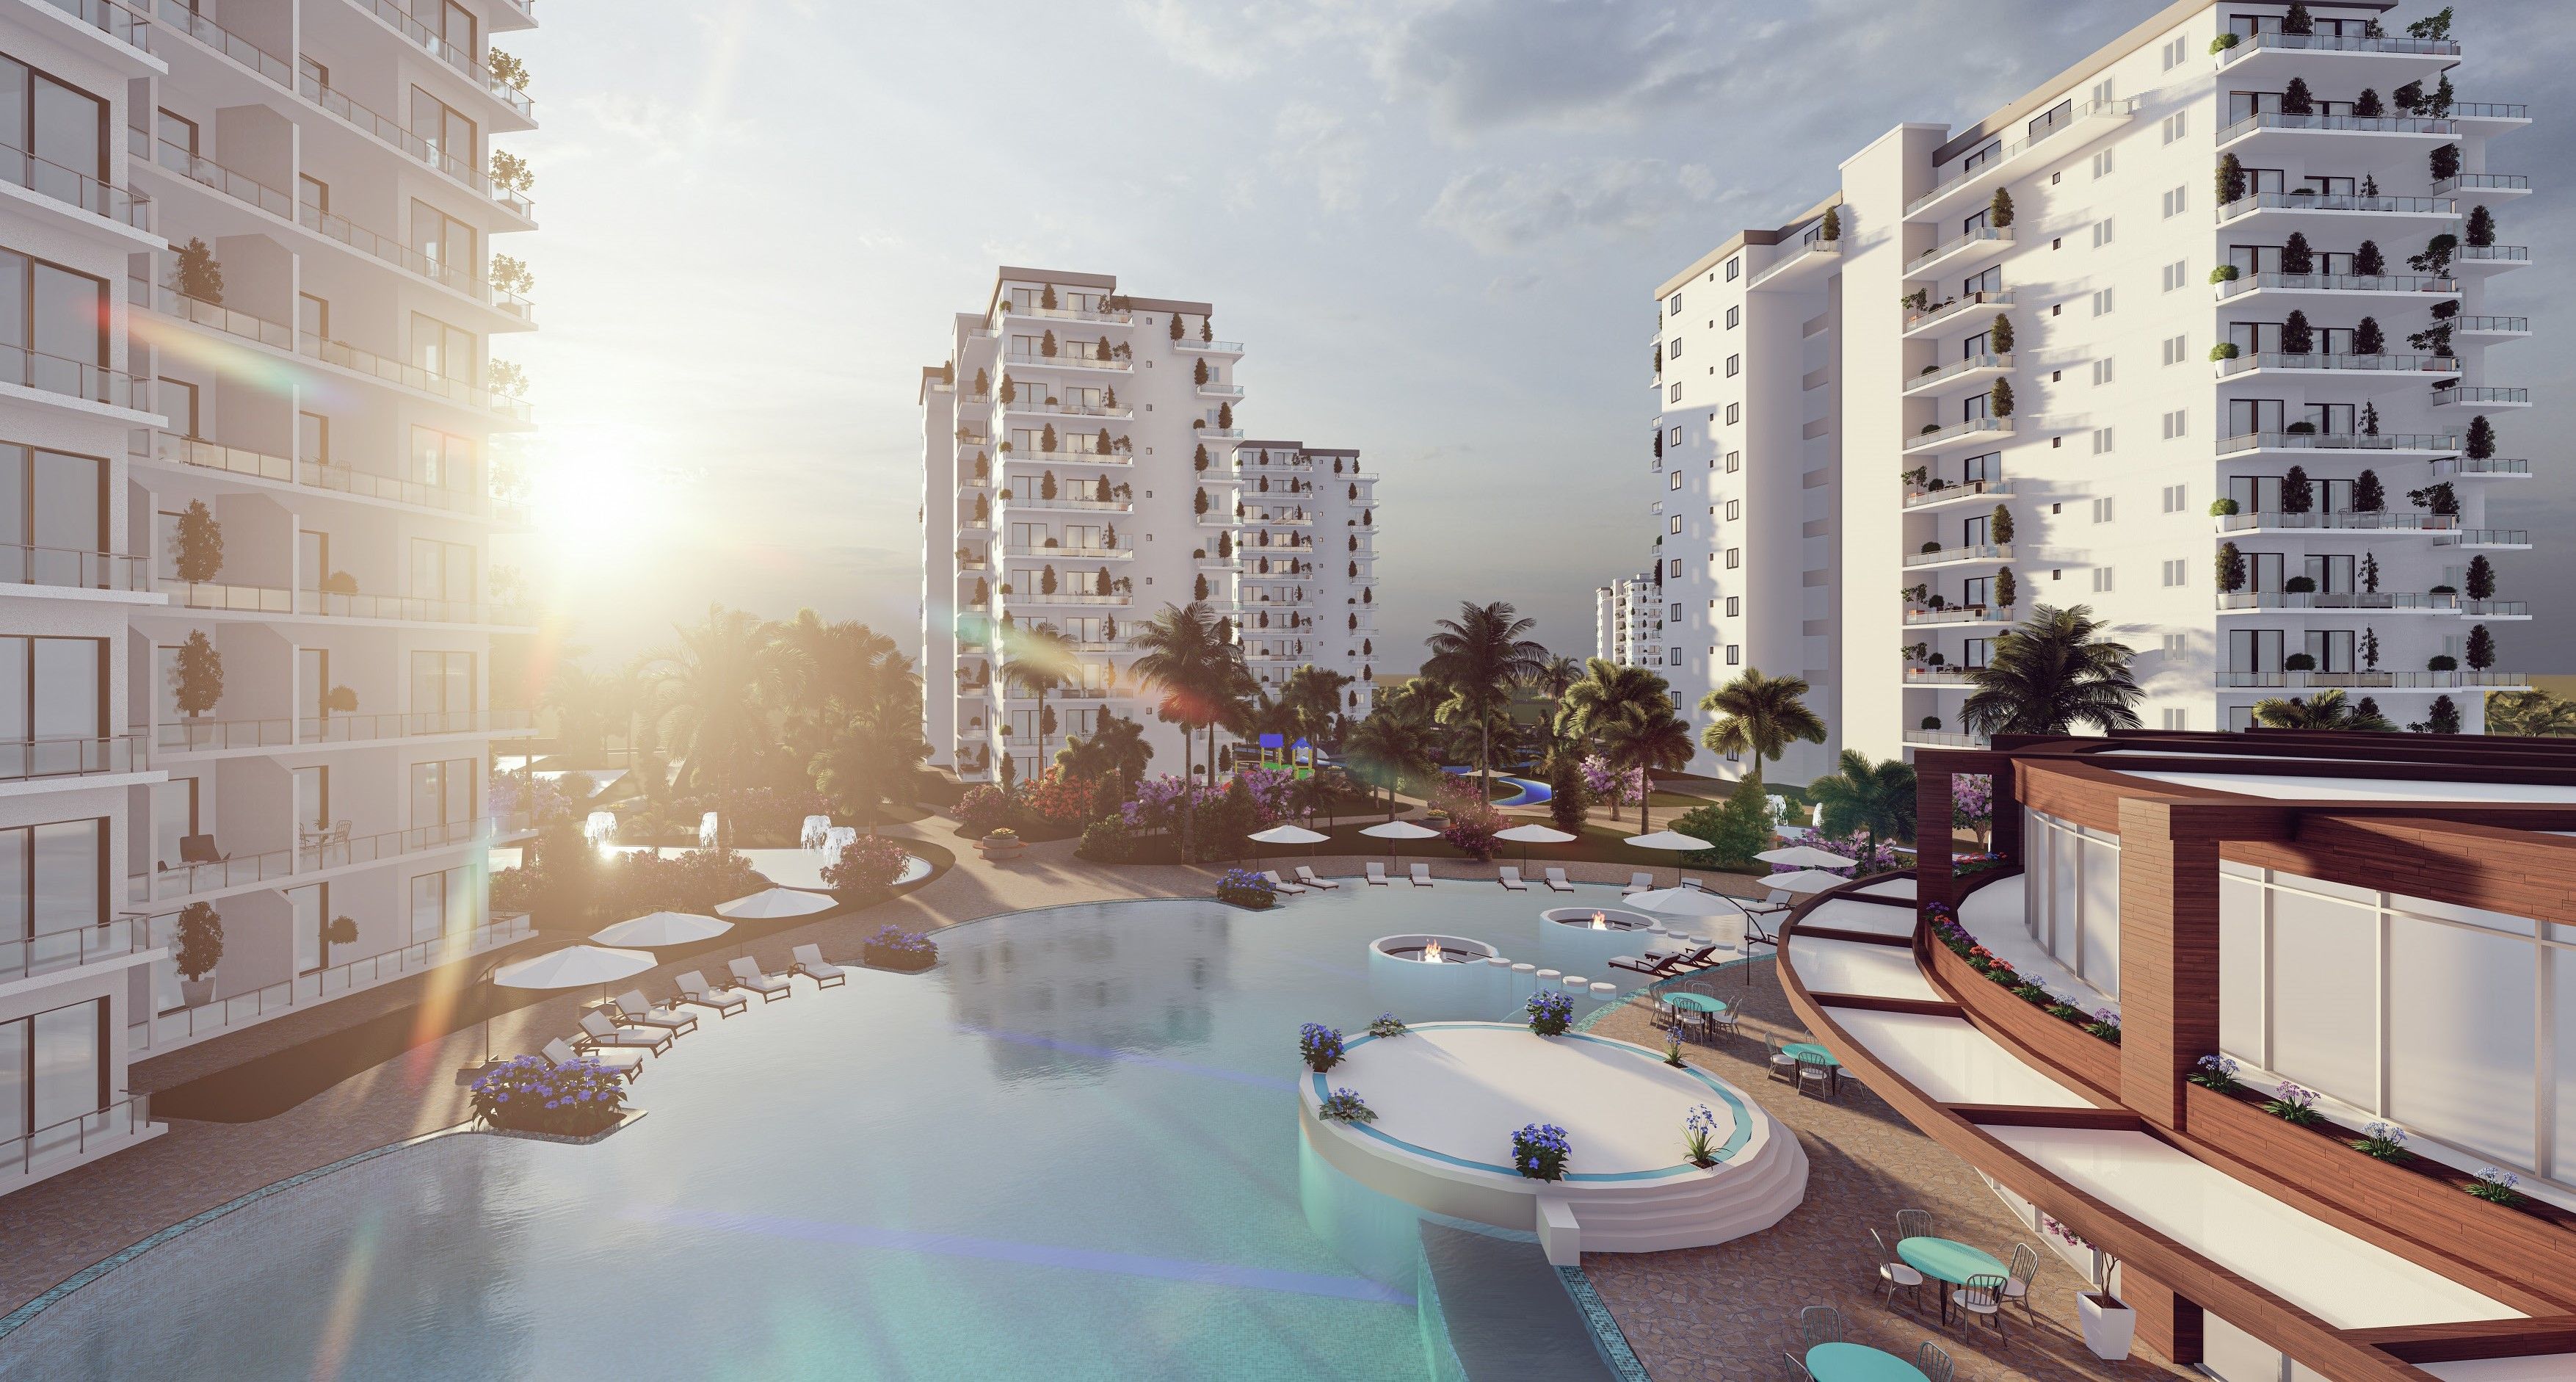 New apartments under construction on the coast of Northern Cyprus